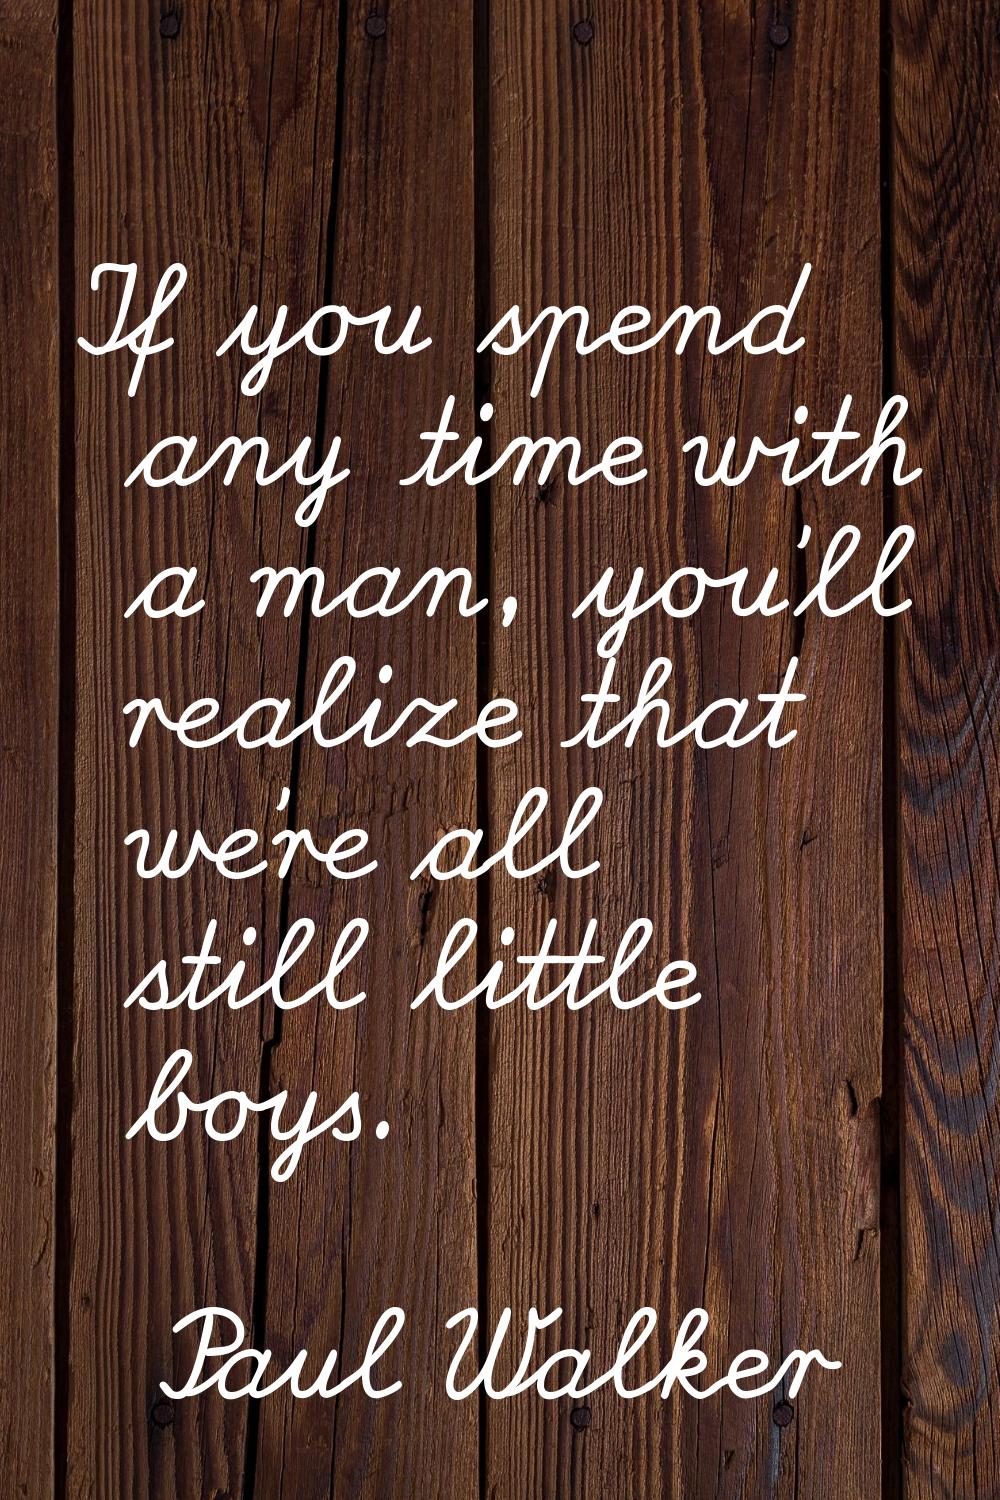 If you spend any time with a man, you'll realize that we're all still little boys.